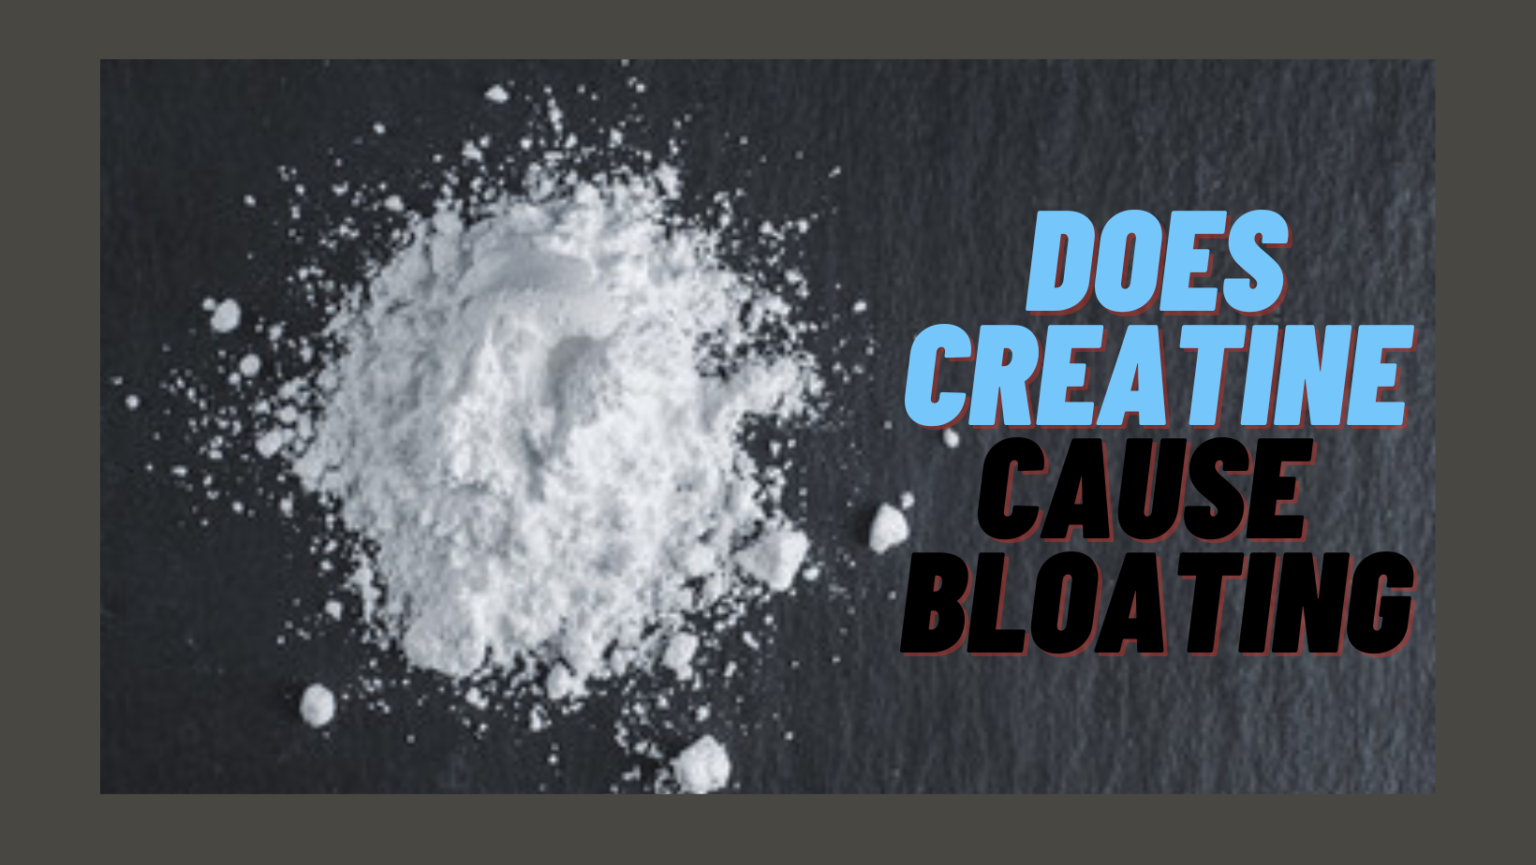 Does Creatine make you bloating